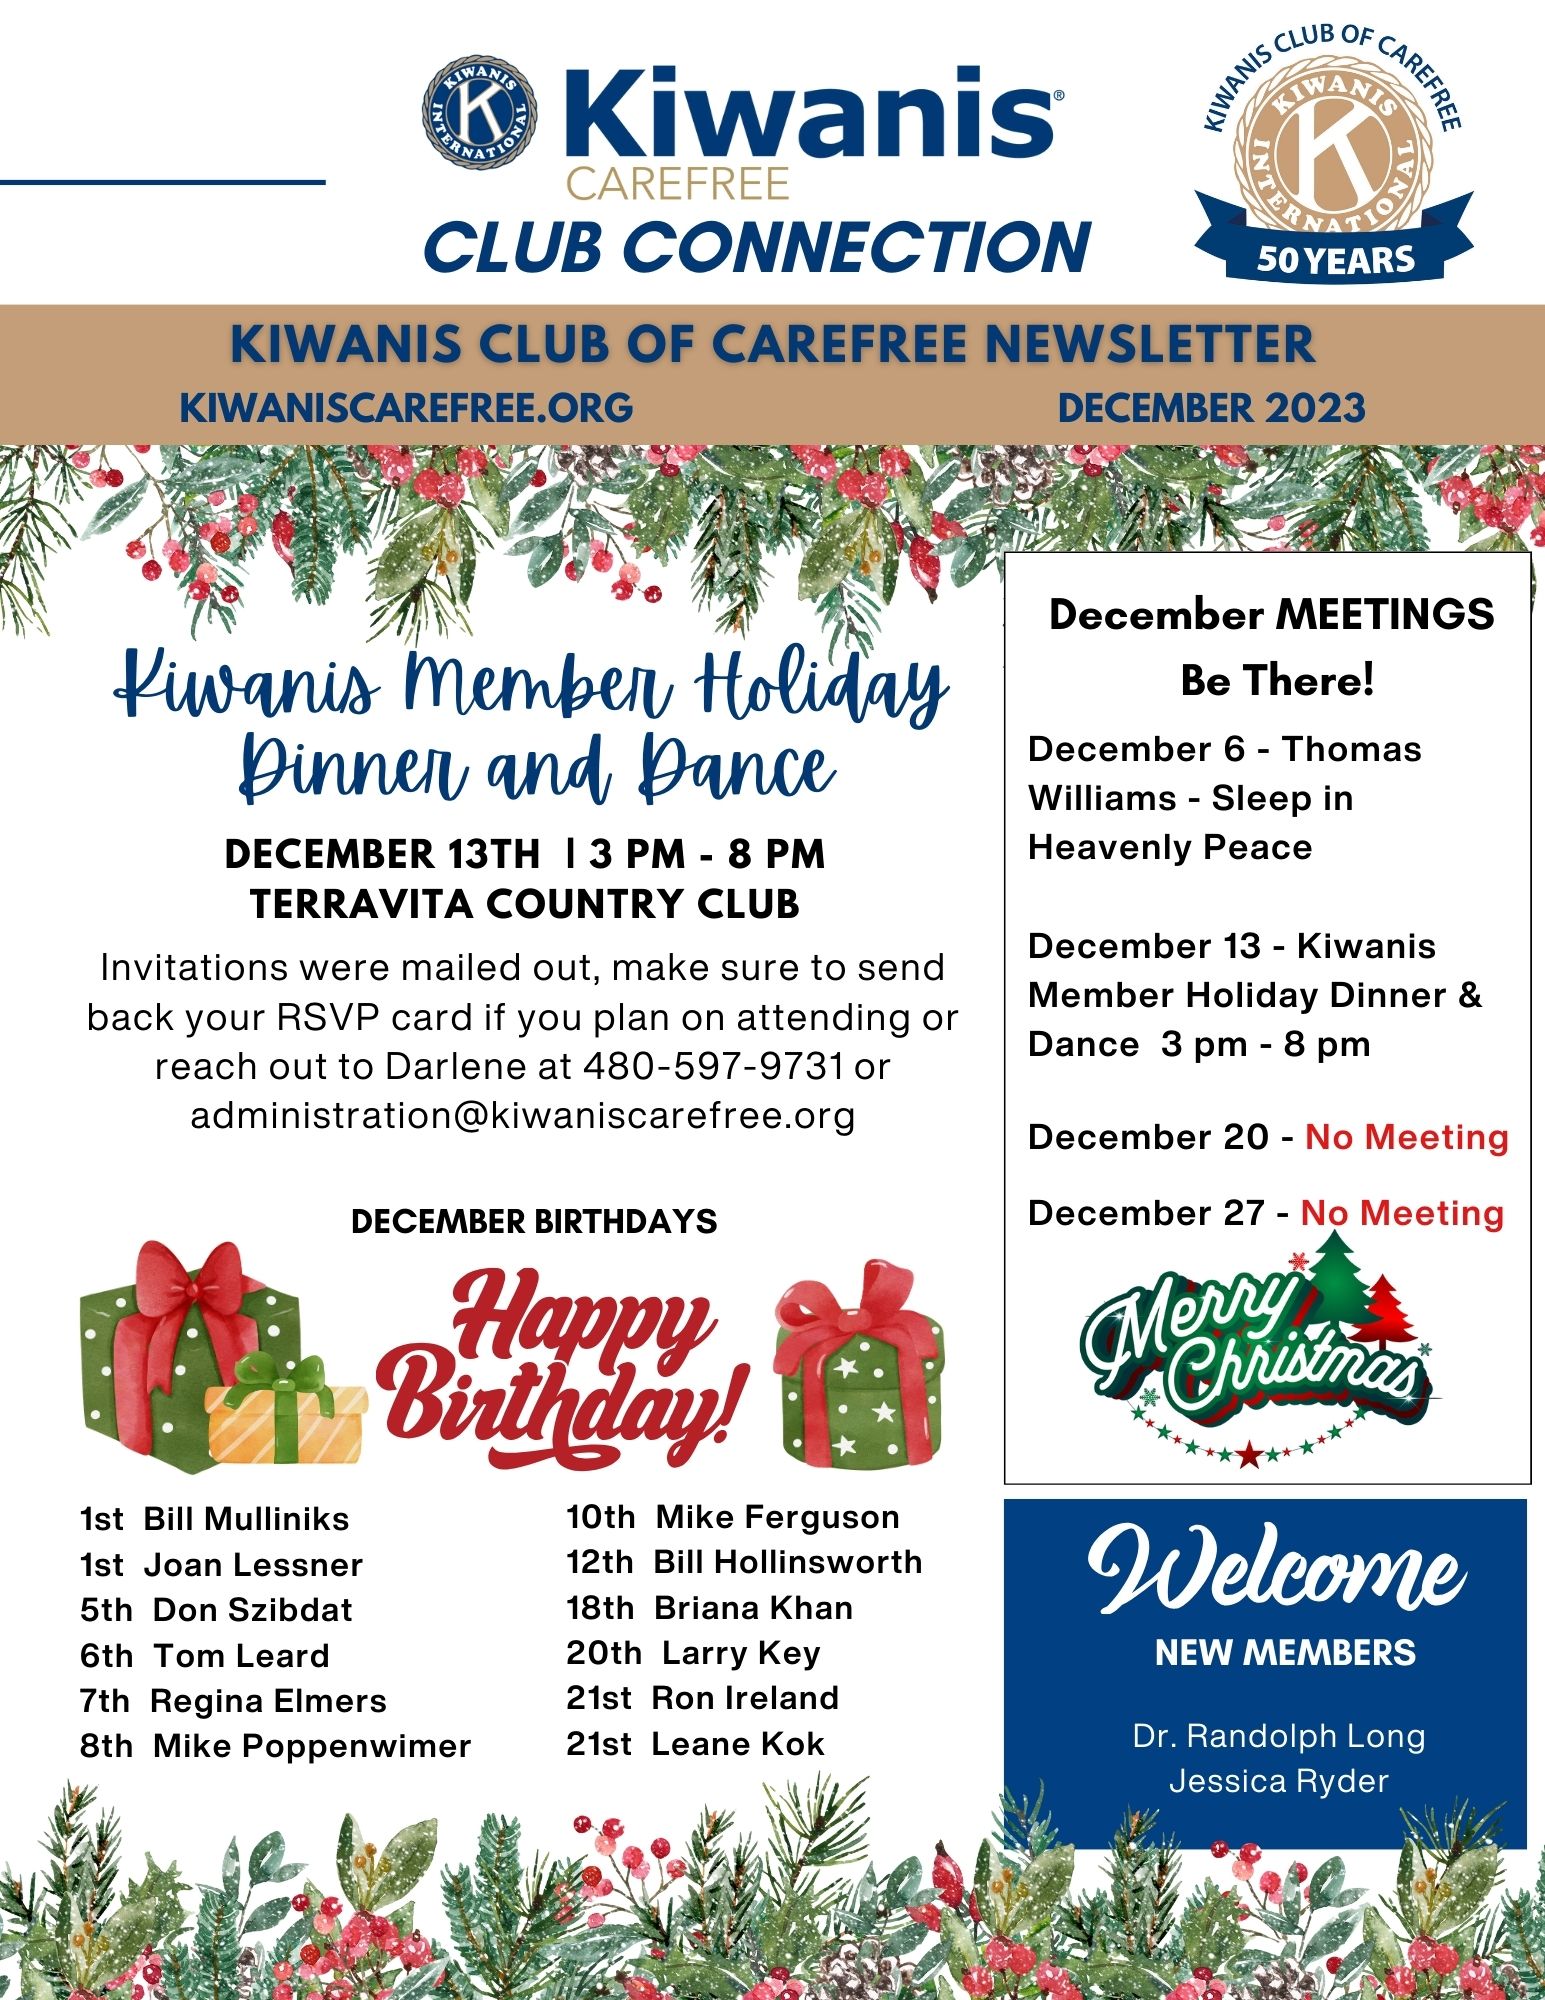 Club Connection - A Kiwanis of Carefree Newsletter